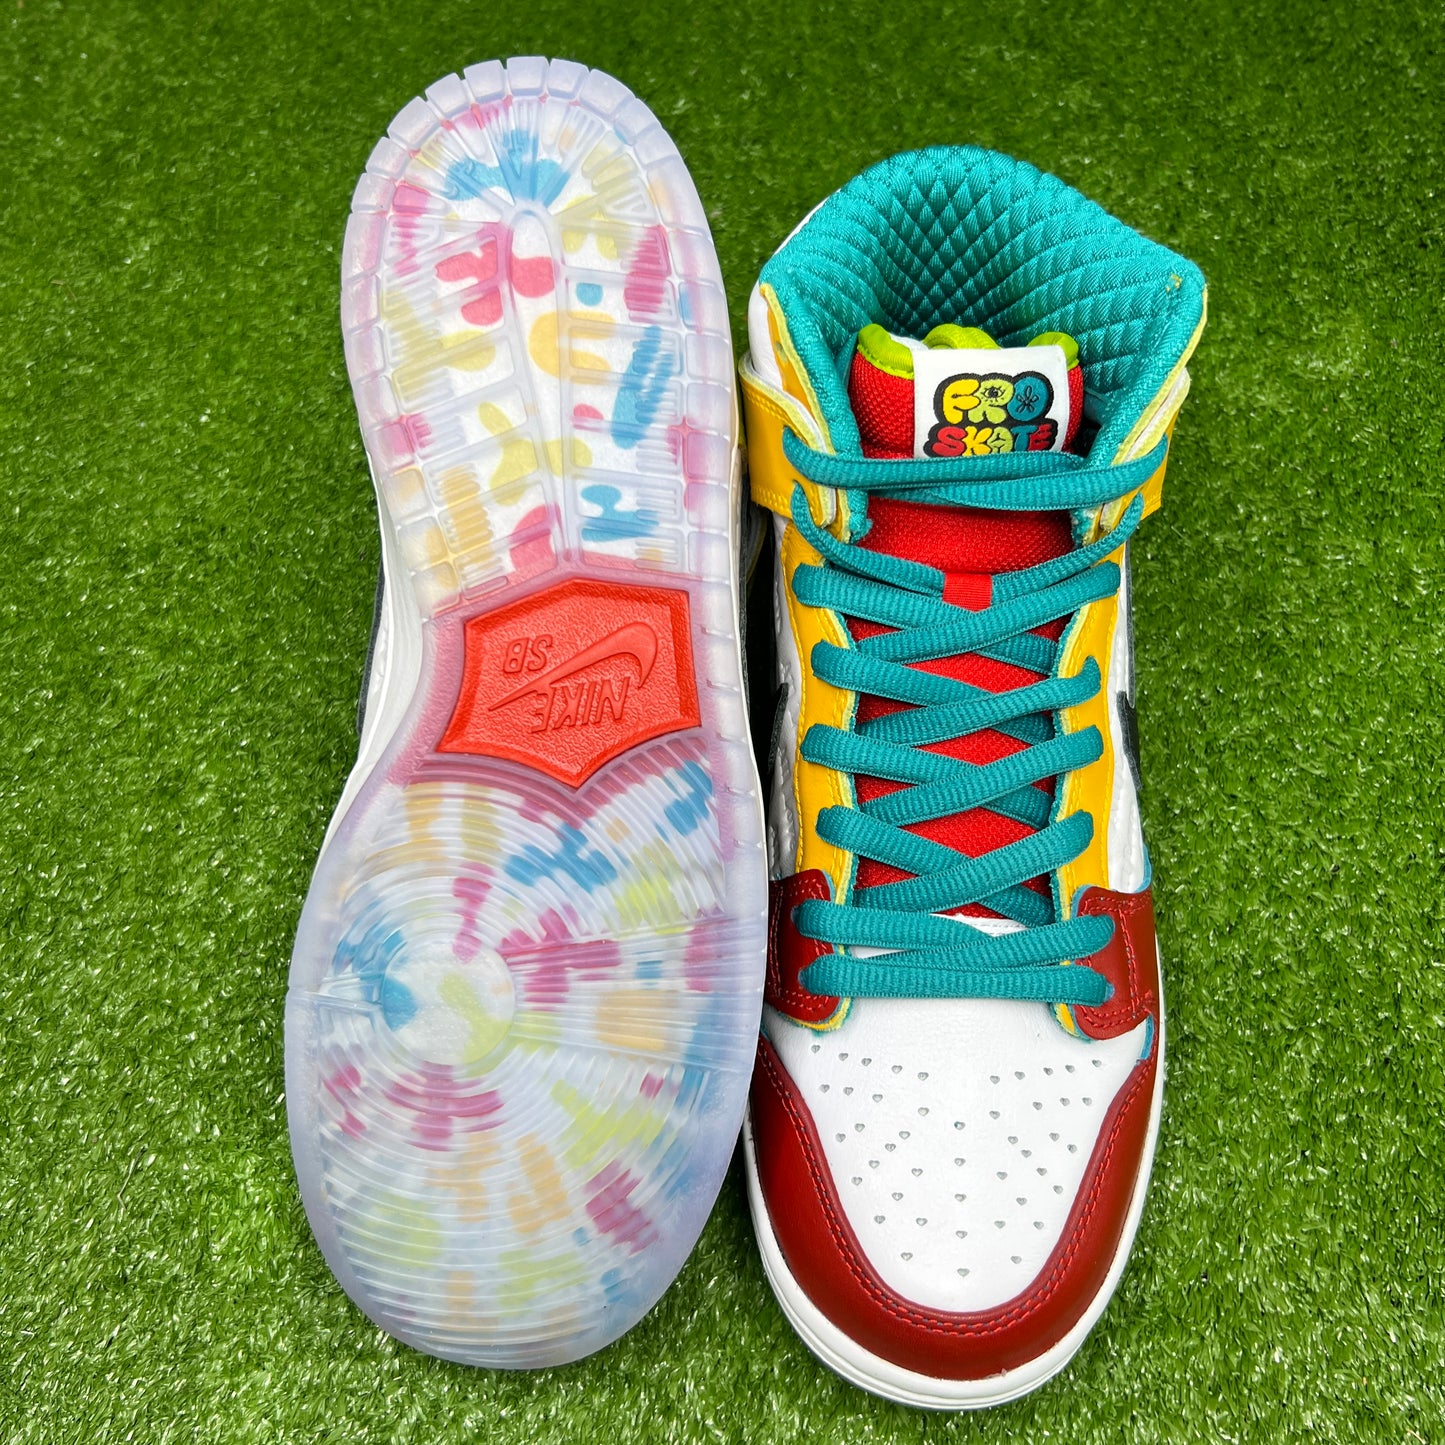 froSkate x Nike SB Dunk High “All Love No Hate”